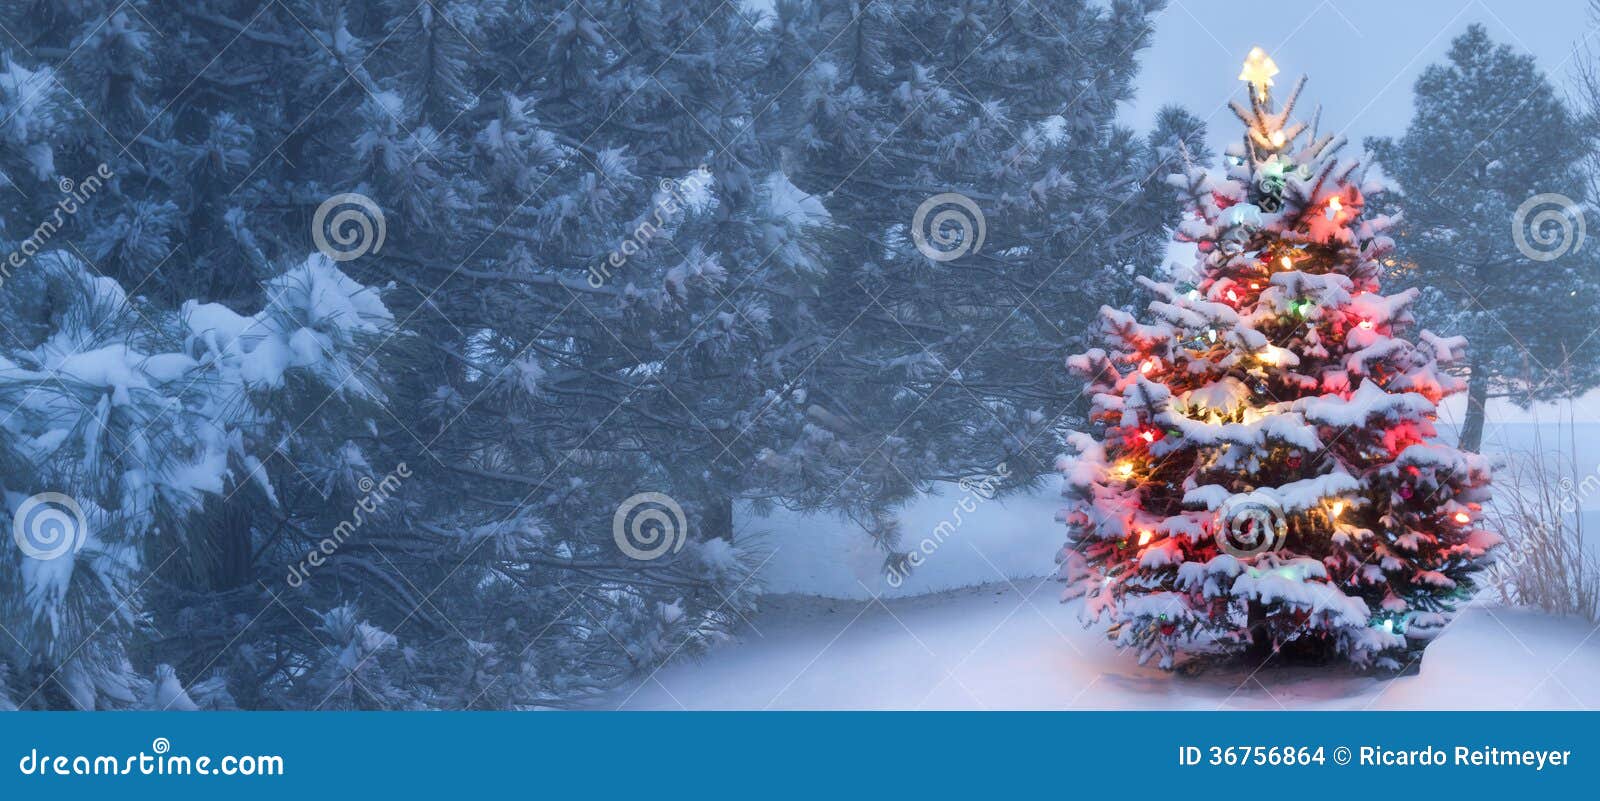 this tree glows brightly on snow covered foggy christmas morning